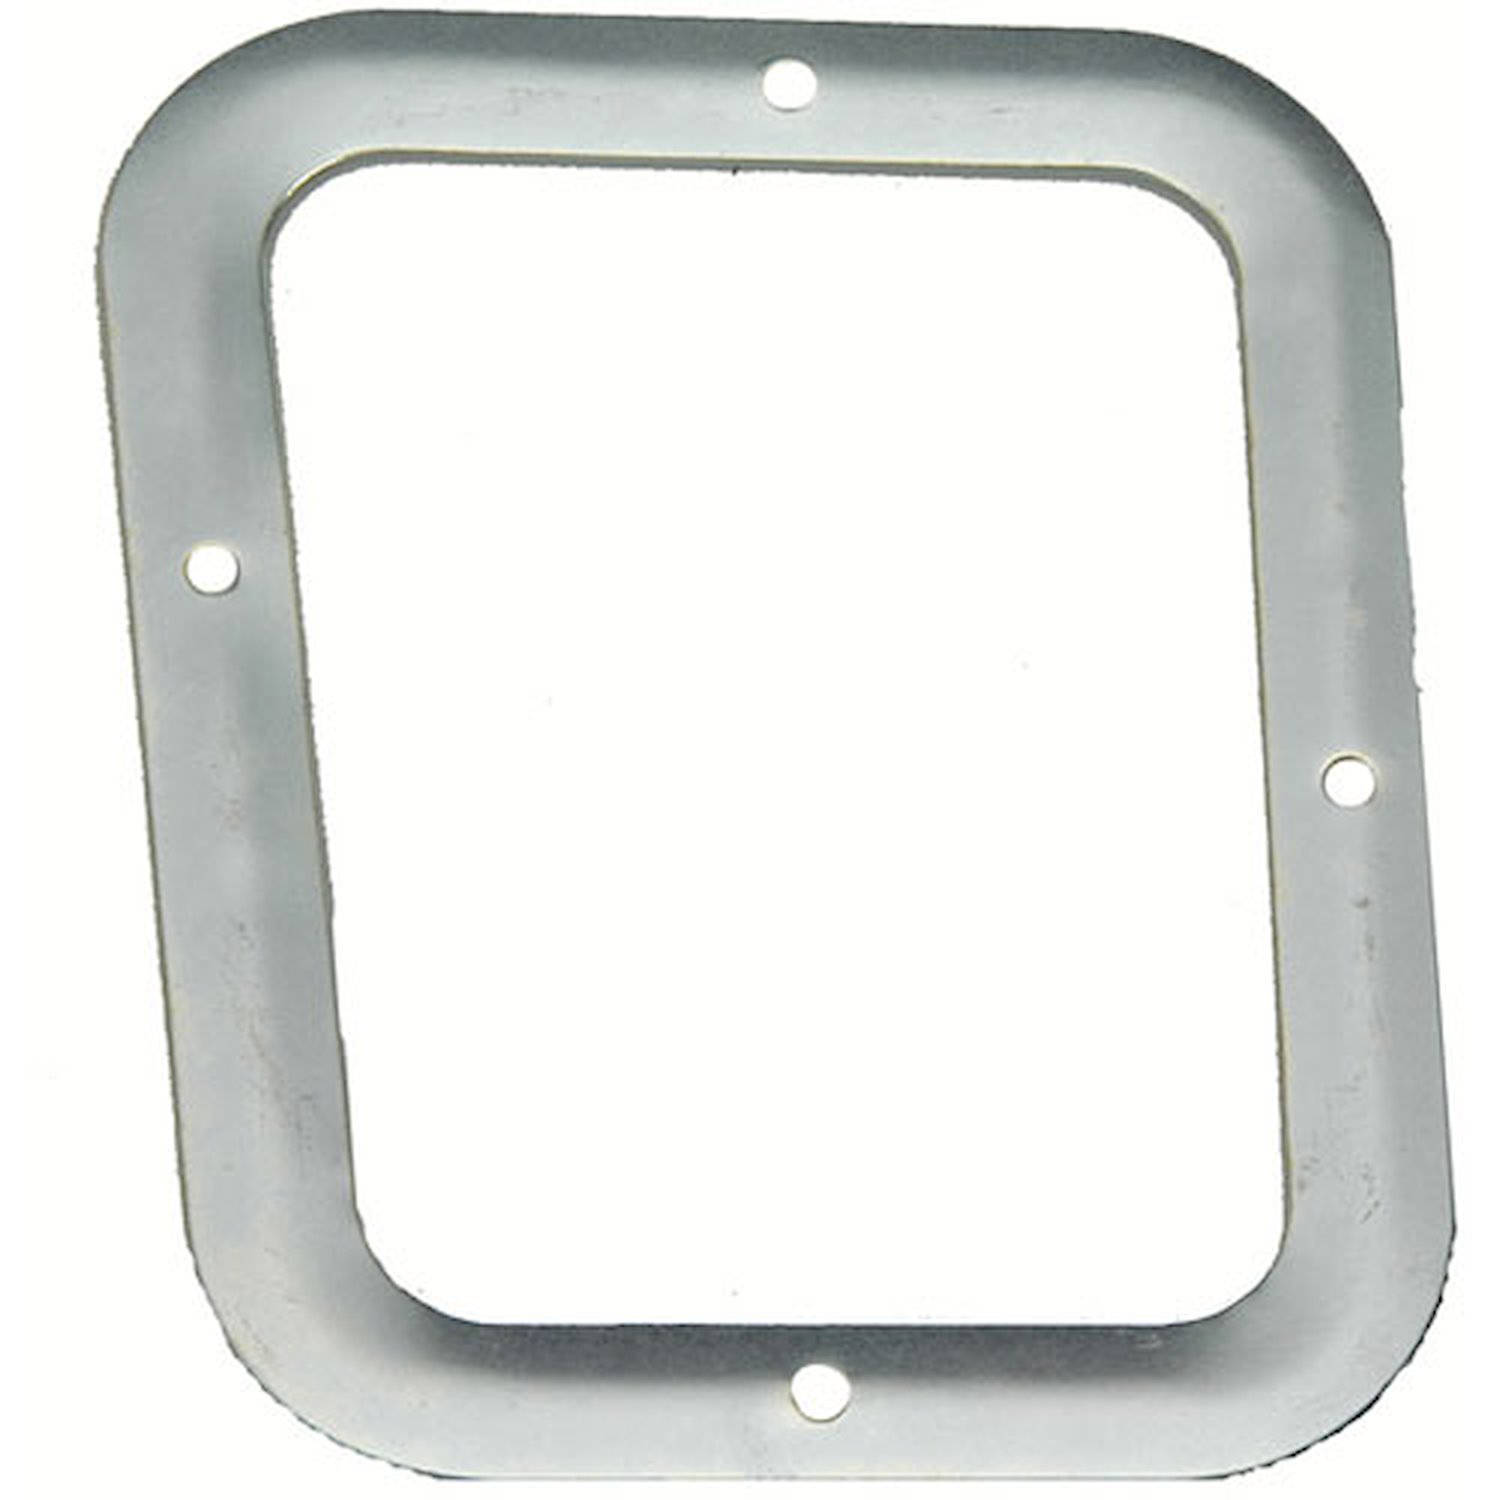 Shifter Boot Retainer for 1967-1971 Camaro with Consold